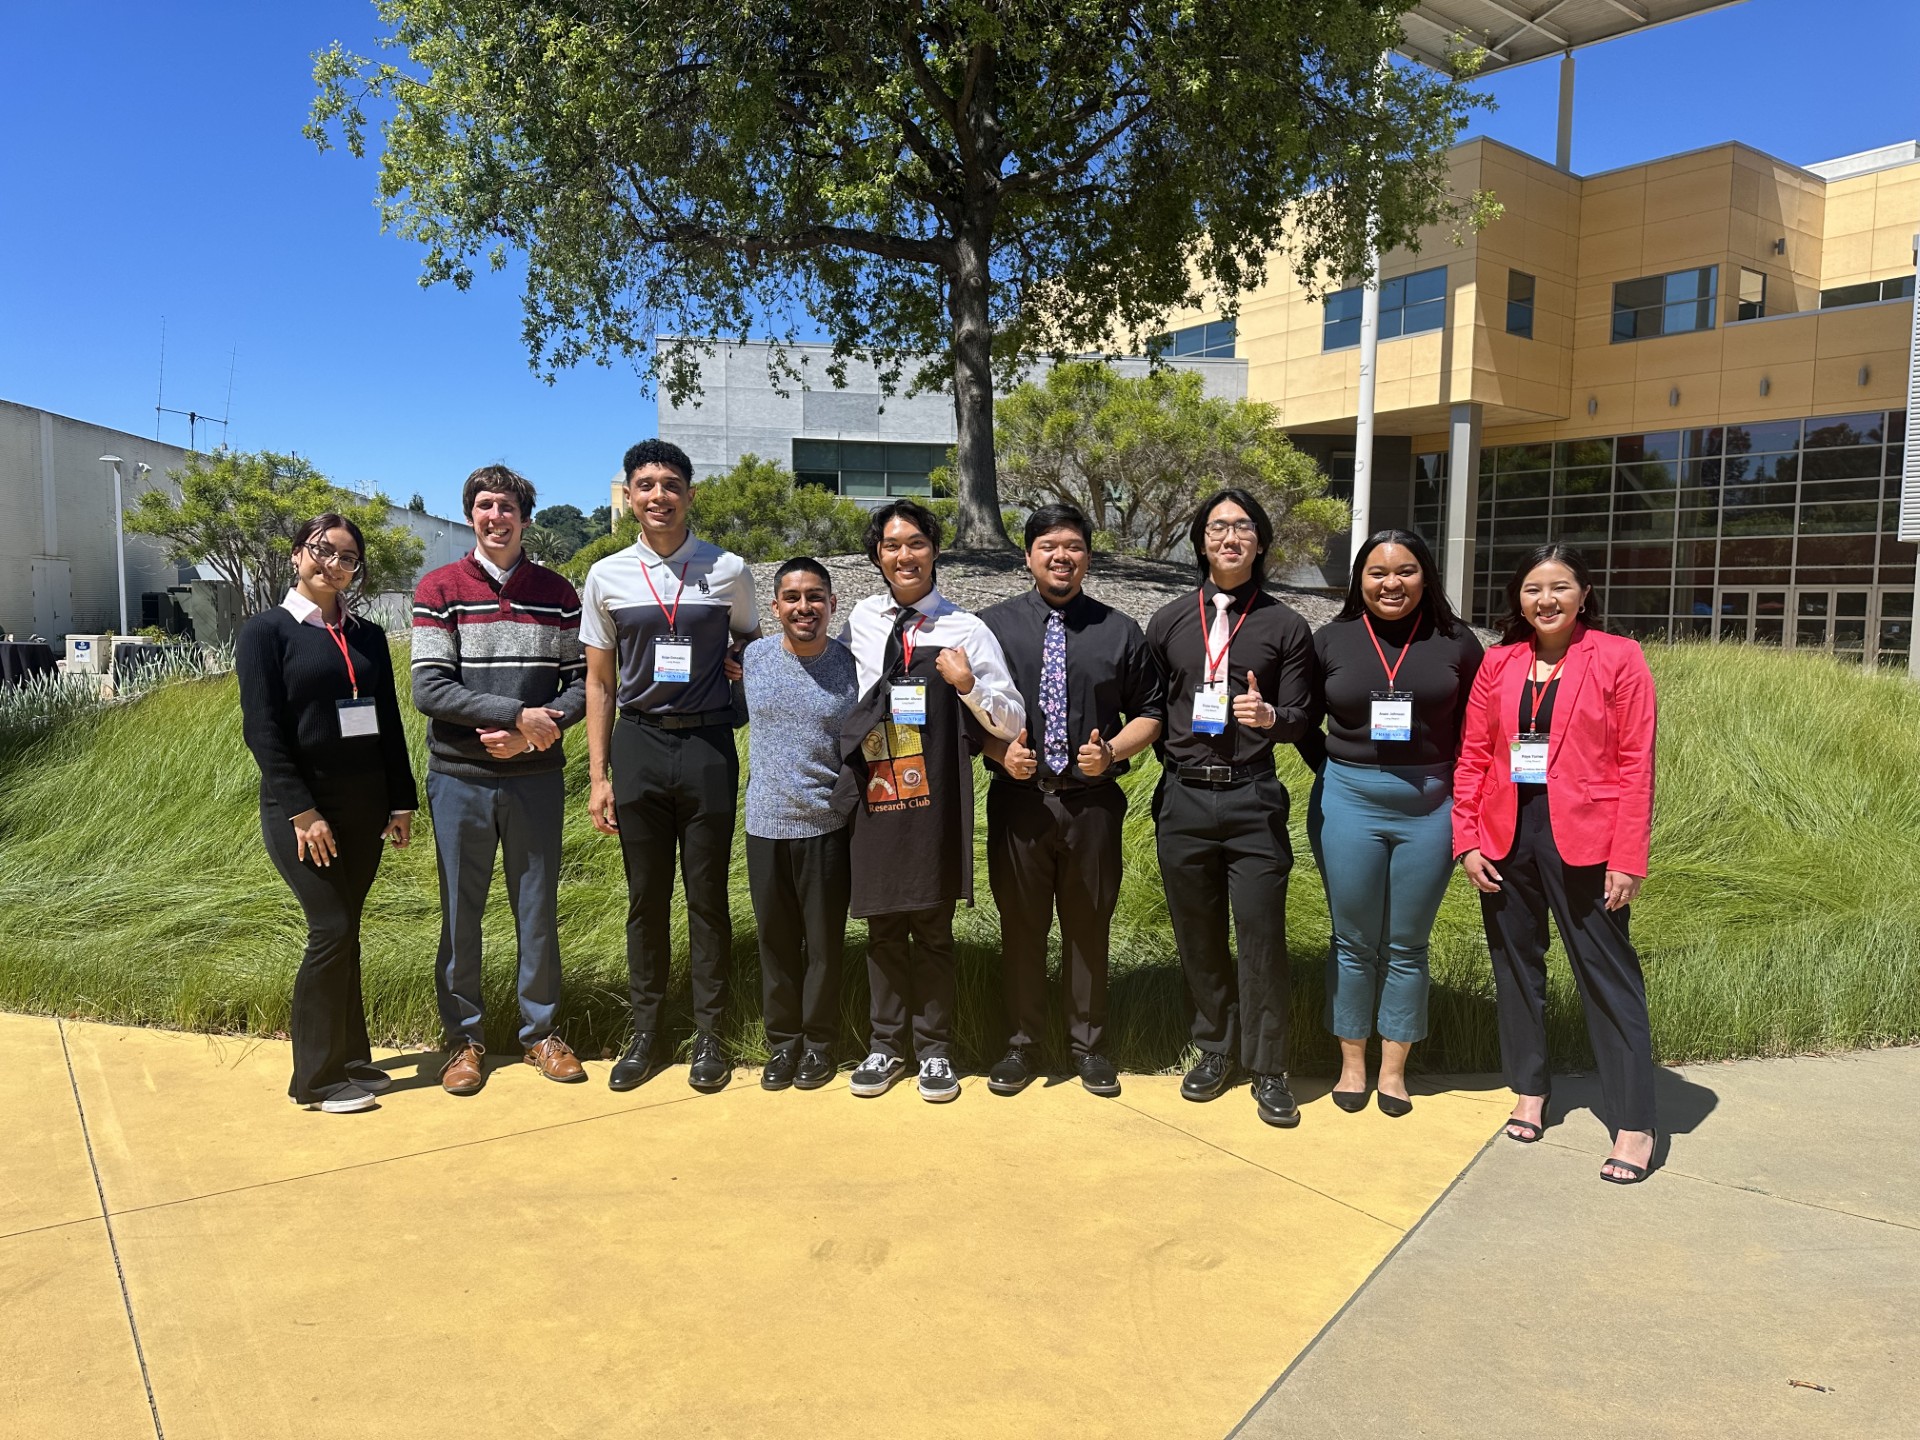 From left to right: undergraduate student - Ruby Barragan, graduate student - Travis Barnett, graduate student - Brian Gonzalez, undergraduate student Angel Marin-Flores, undergraduate student - Alex Alonzo, undergraduate student - Jaylen Leyratana, undergraduate student - Bryan Kang, undergraduate student - Anais Johnson, and undergraduate student - Raya Torres.